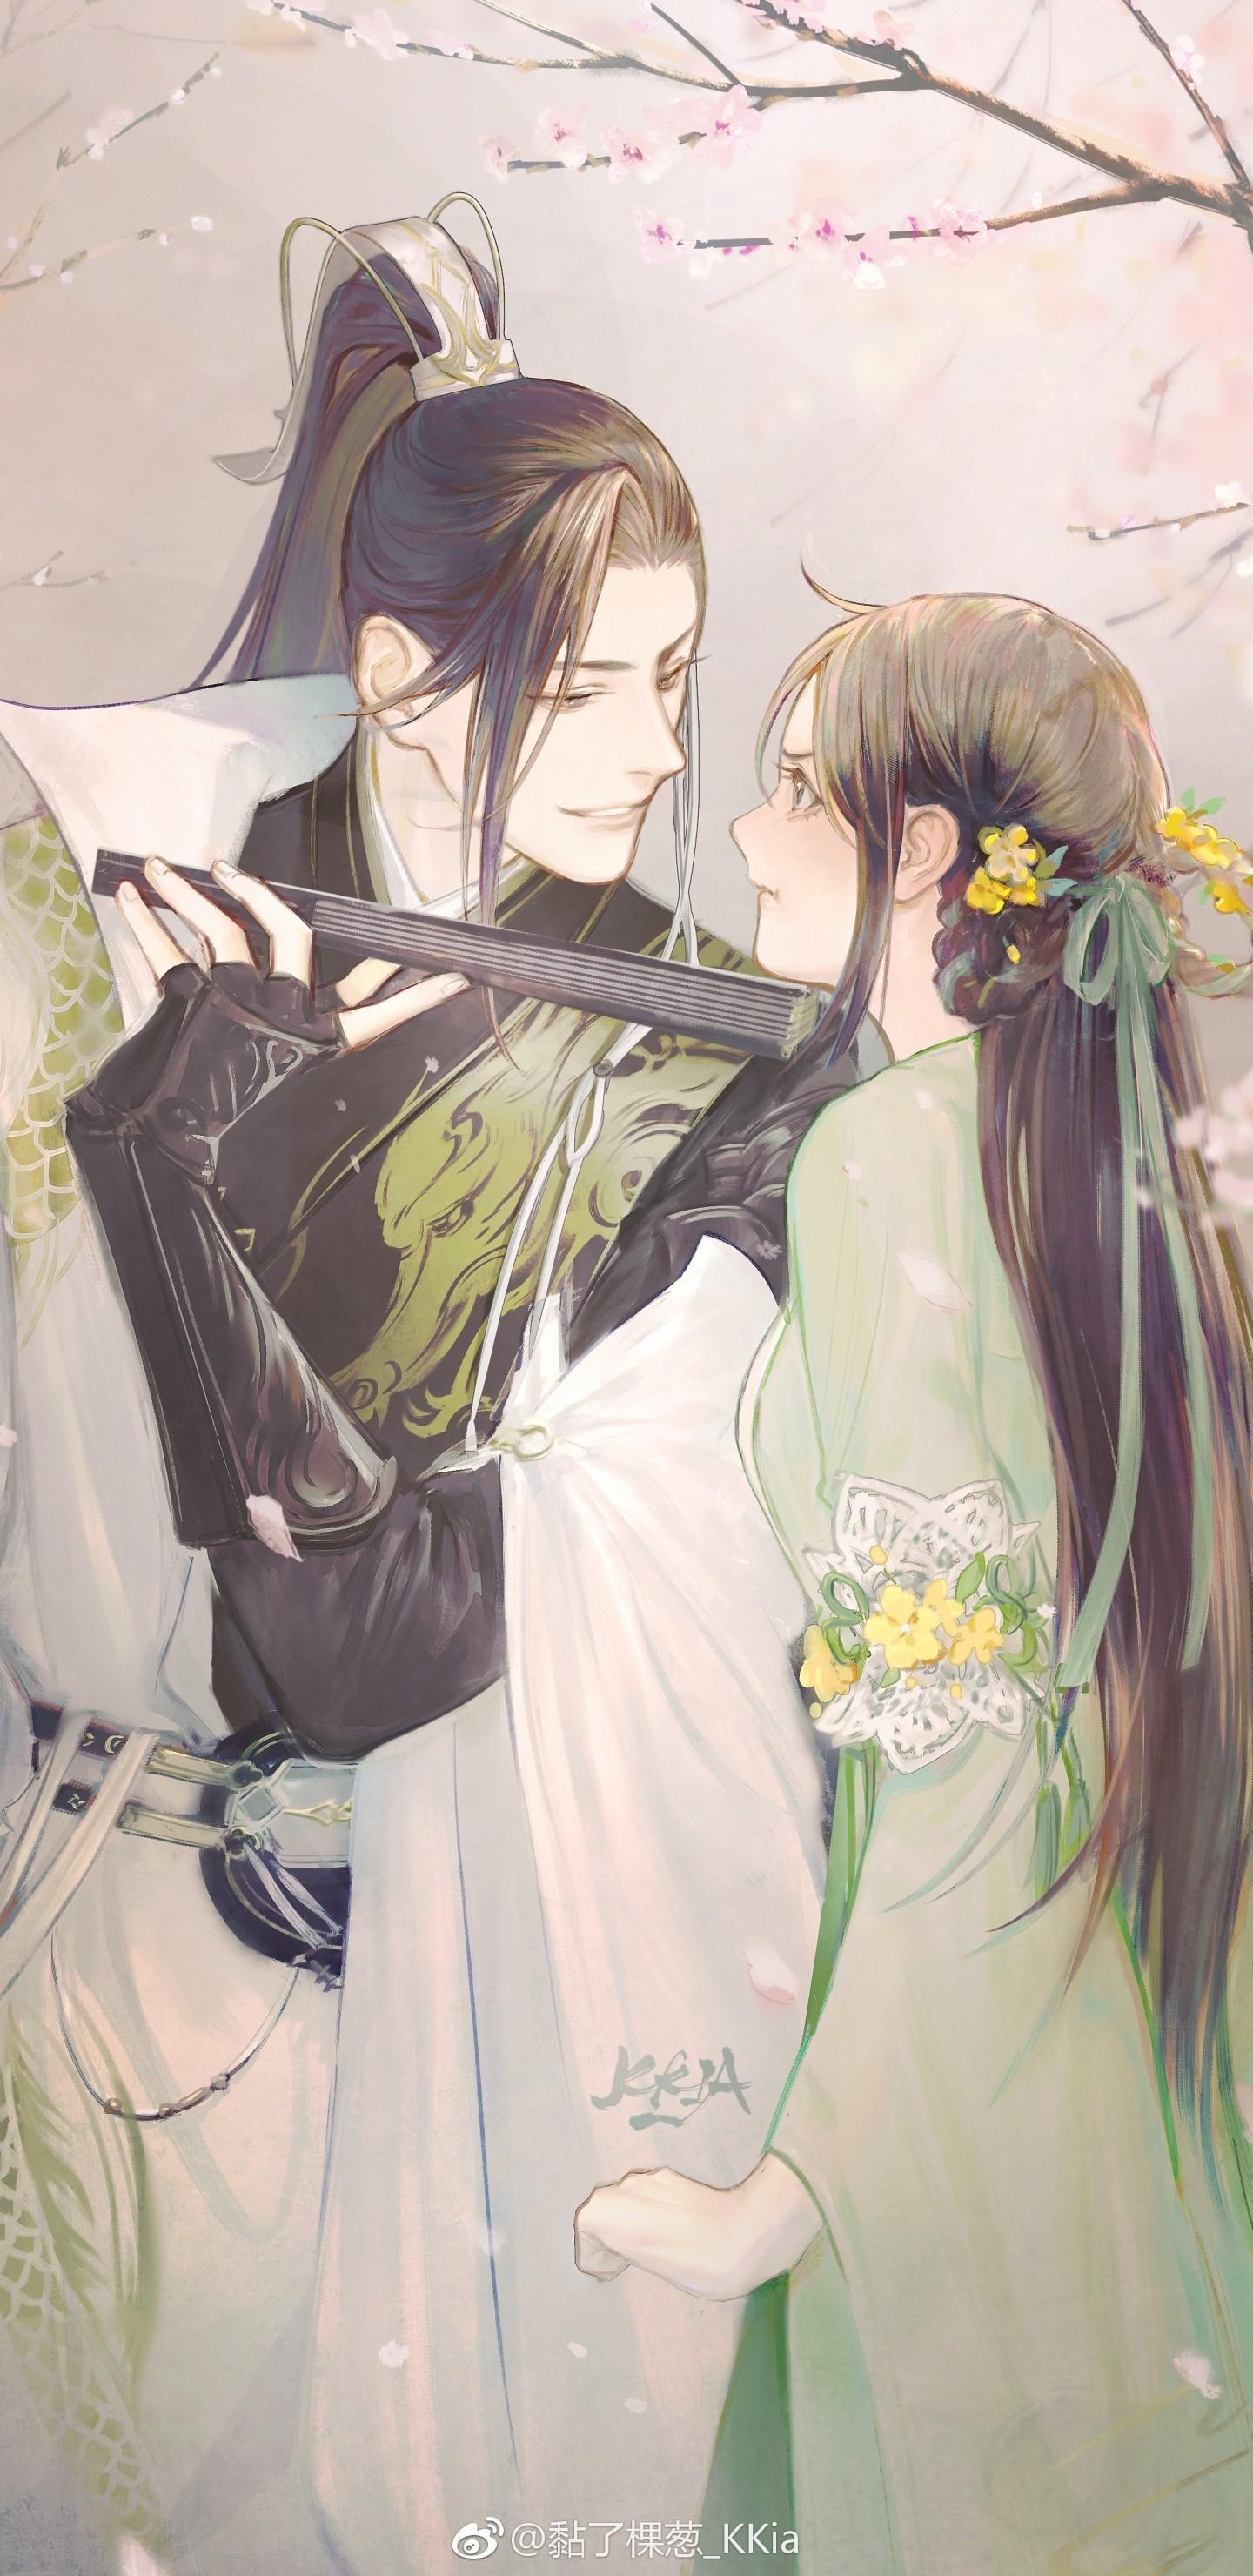 Download 1440x2960 Anime Couple, Romance, Chinese Clothes